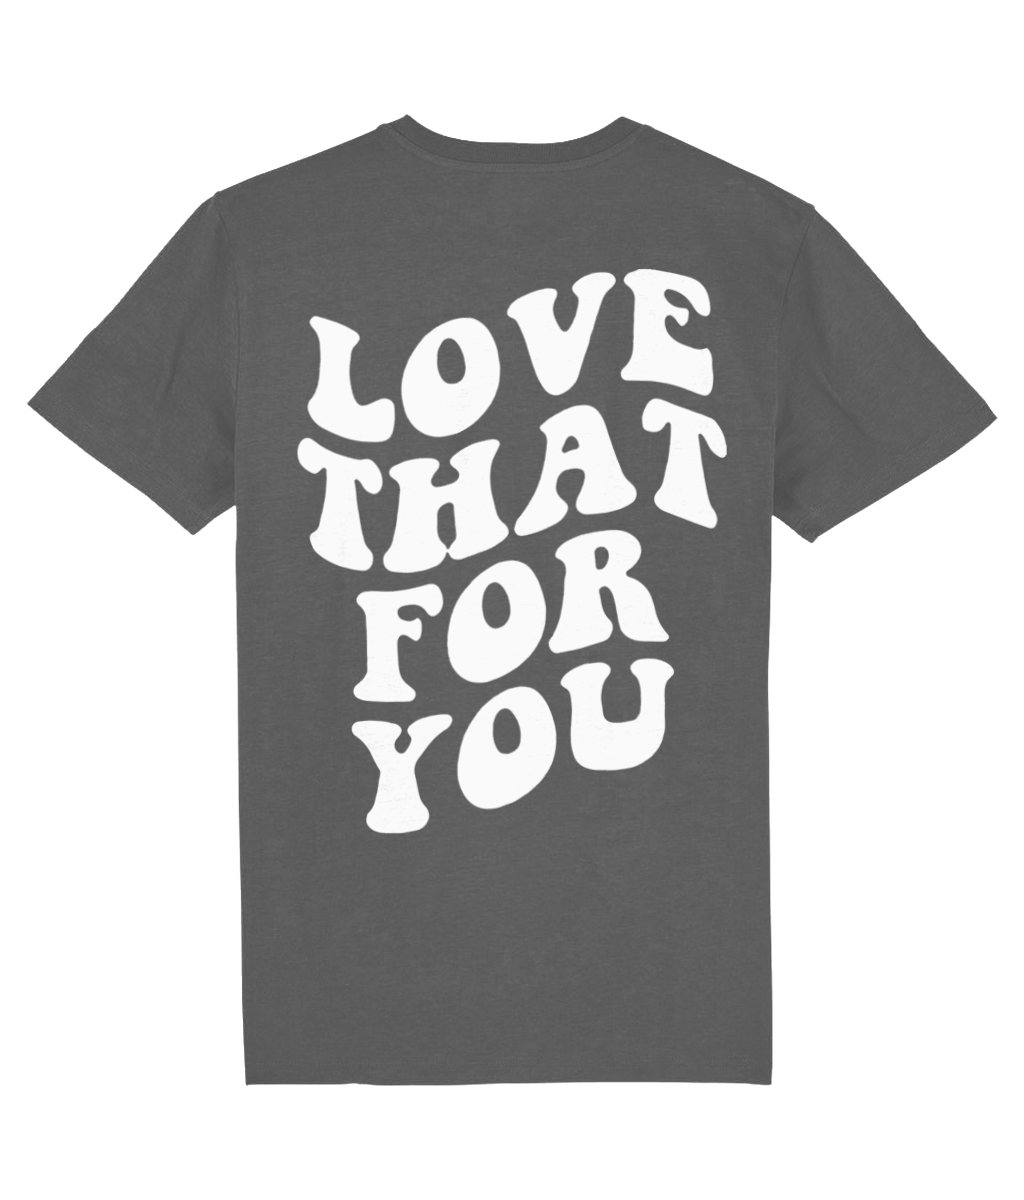 LOVE THAT FOR YOU SHIRT